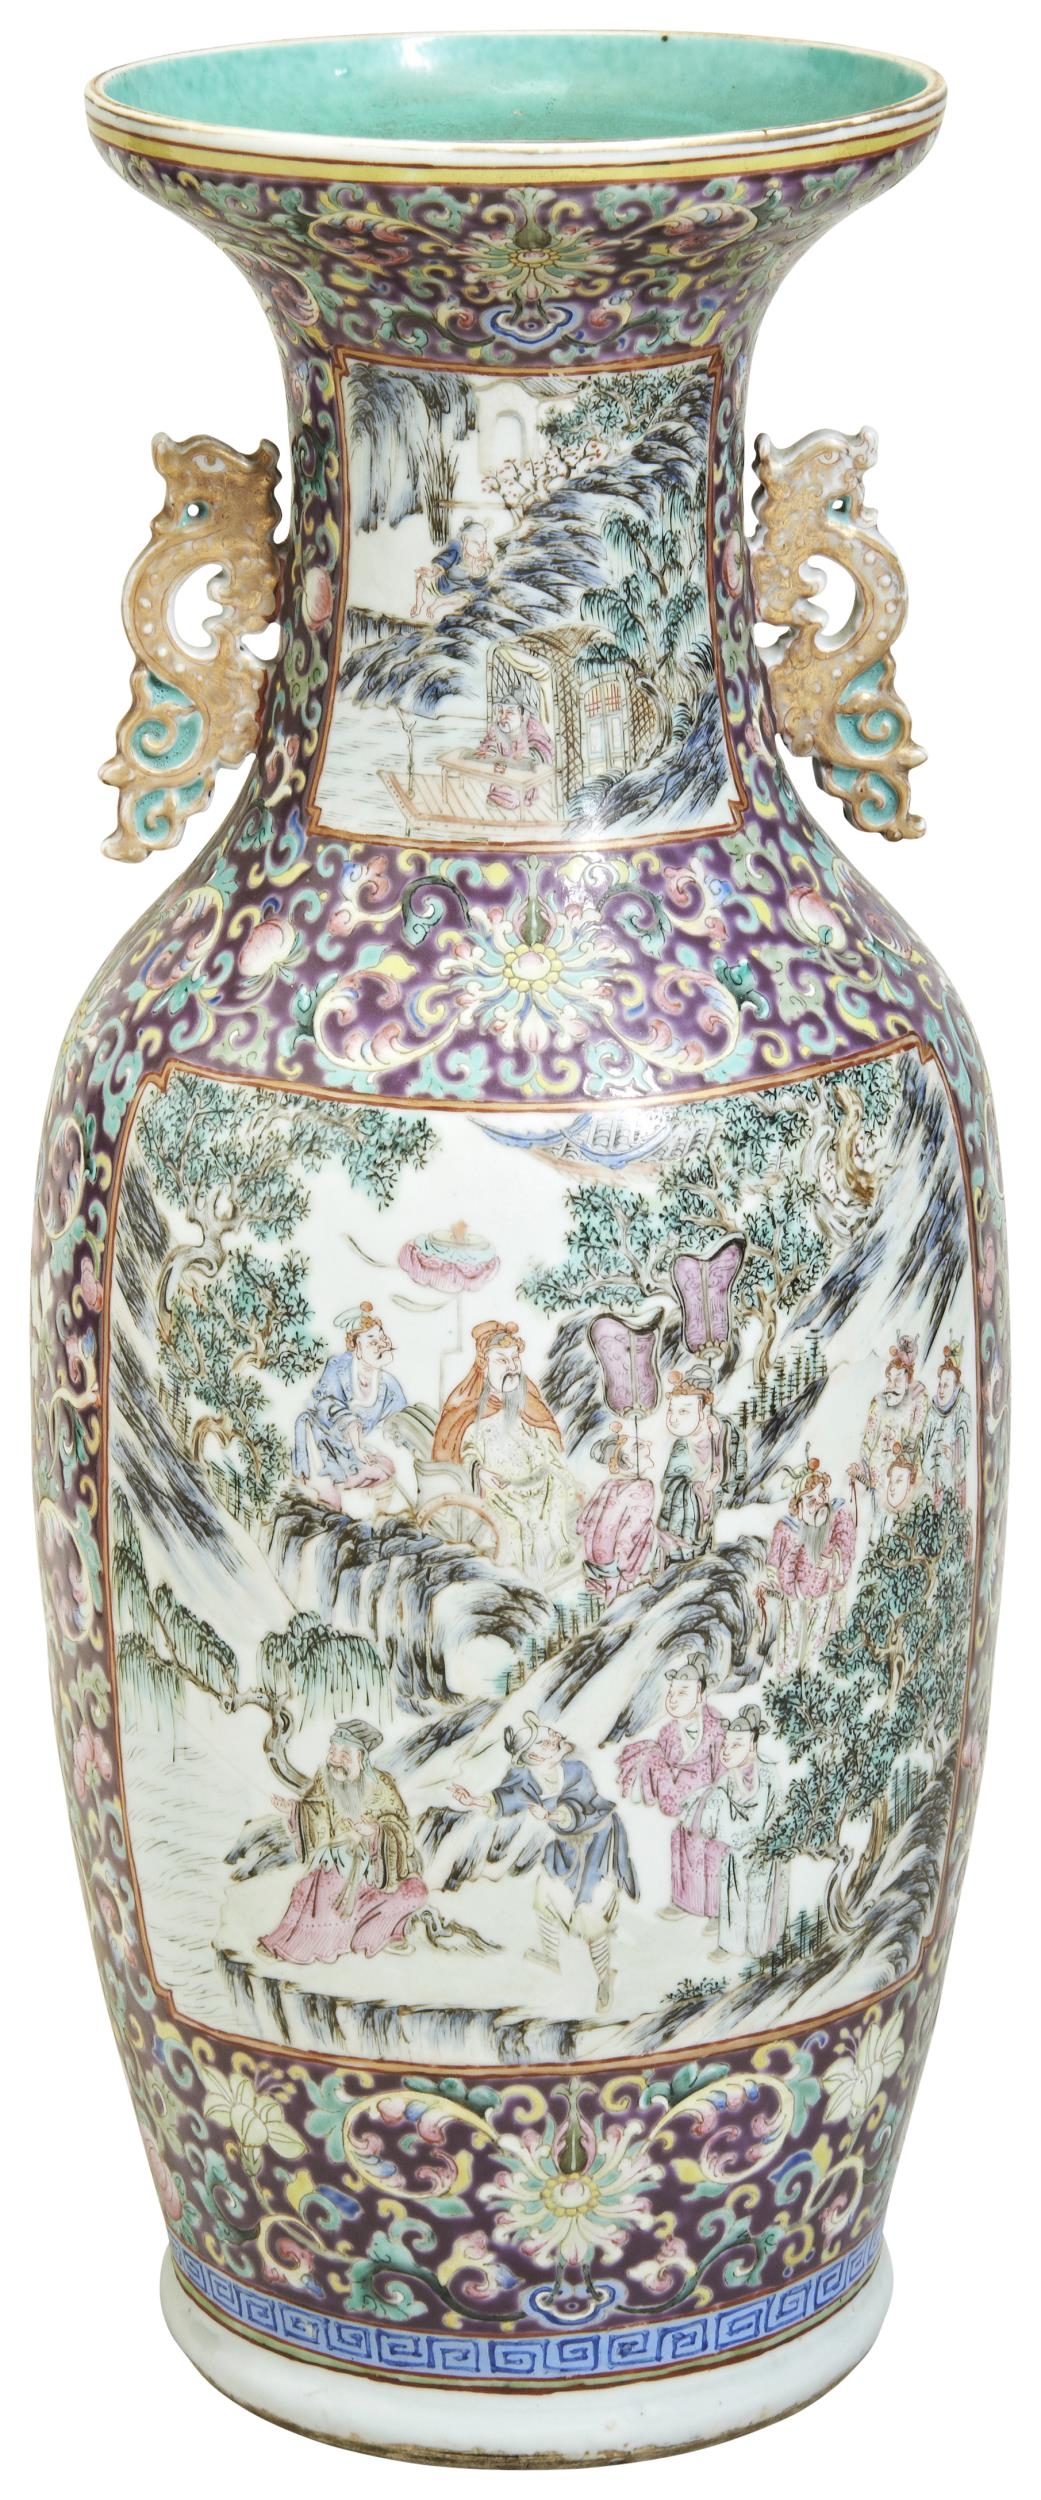 A LARGE FAMILLE ROSE VASE QING DYNASTY, 19TH CENTURY the baluster sides decorated with figural - Image 2 of 3